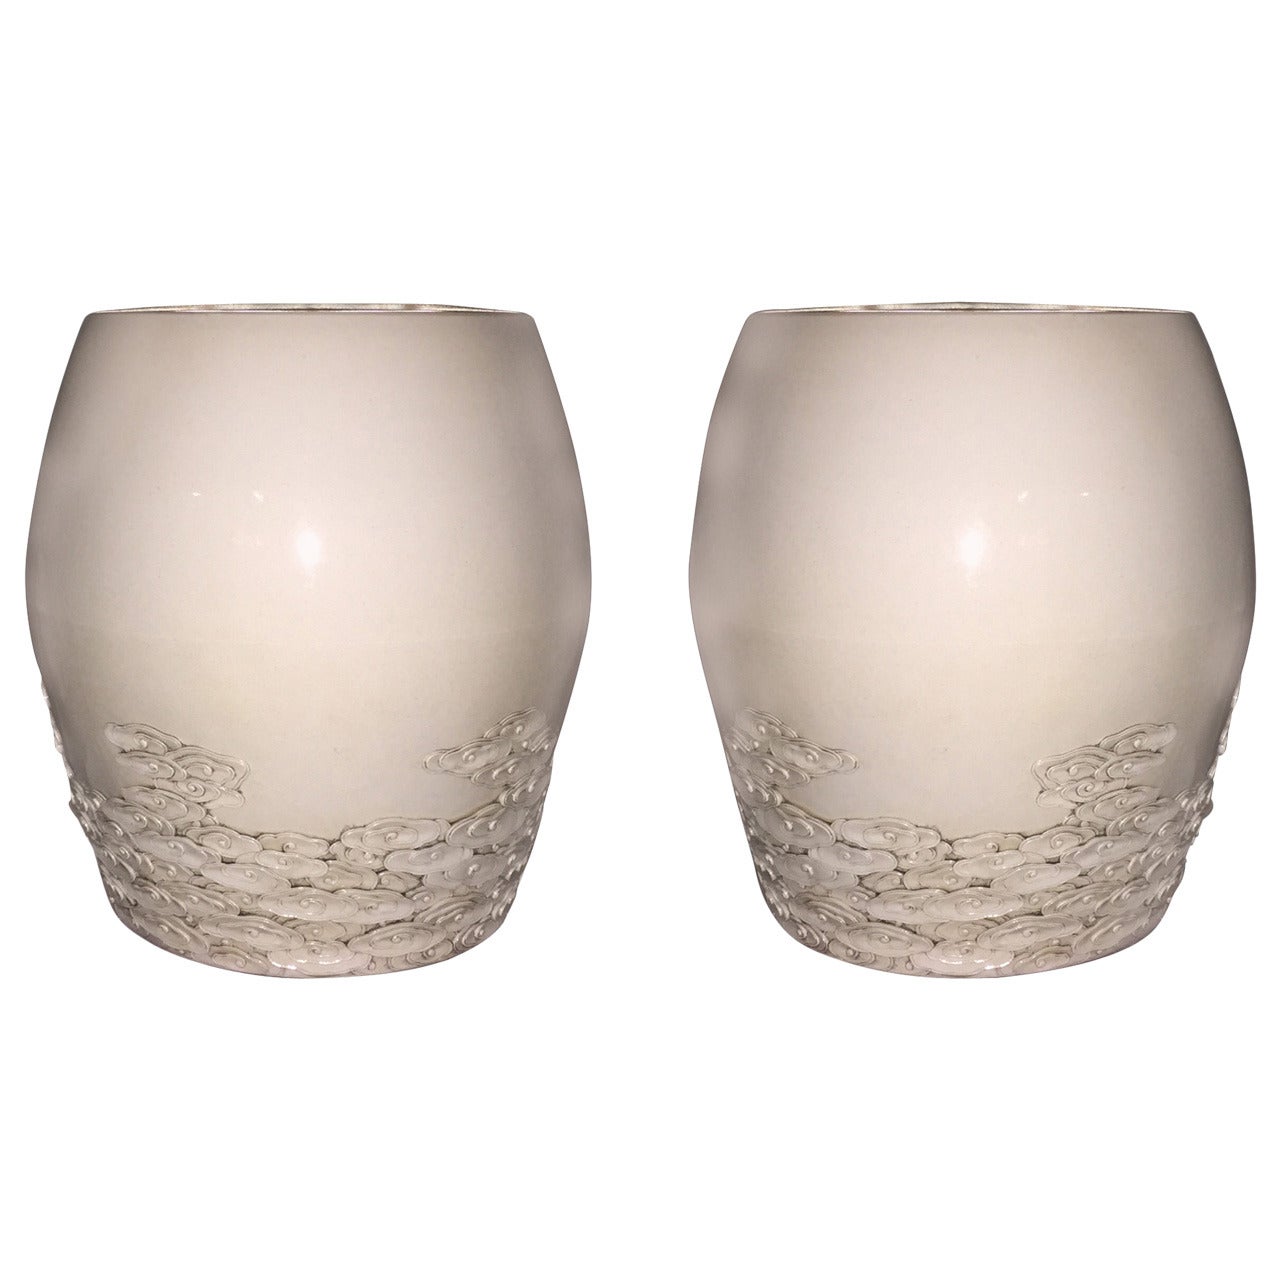 Pair of Off-White Porcelain Stools